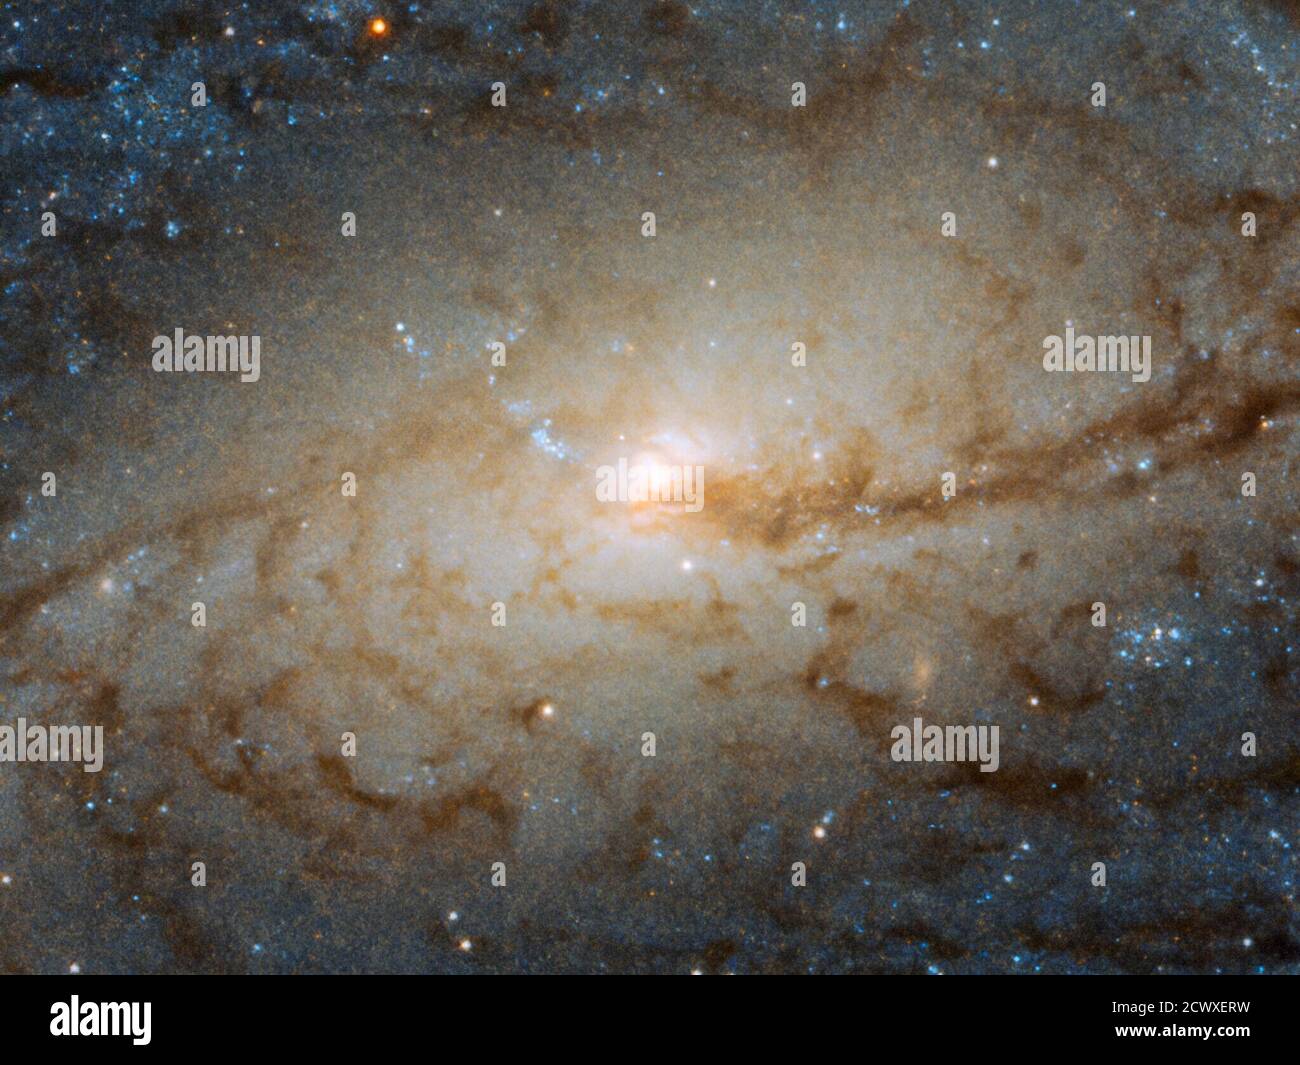 Hubble Spies Galactic Traffic Jam The barred spiral galaxy NGC 3887, seen here as viewed by the Wide Field Camera 3 aboard the NASA/ESA Hubble Space Telescope, lies over 60 million light-years away from us in the southern constellation of Crater (the Cup). It was discovered on Dec. 31, 1785, by astronomer William Herschel.  Its orientation to us, while not exactly face-on, allows us to see NGC 3887’s spiral arms and central bulge in detail, making it an ideal target for studying a spiral galaxy’s winding arms and the stars within them.   The very existence of spiral arms was for a long time a Stock Photo